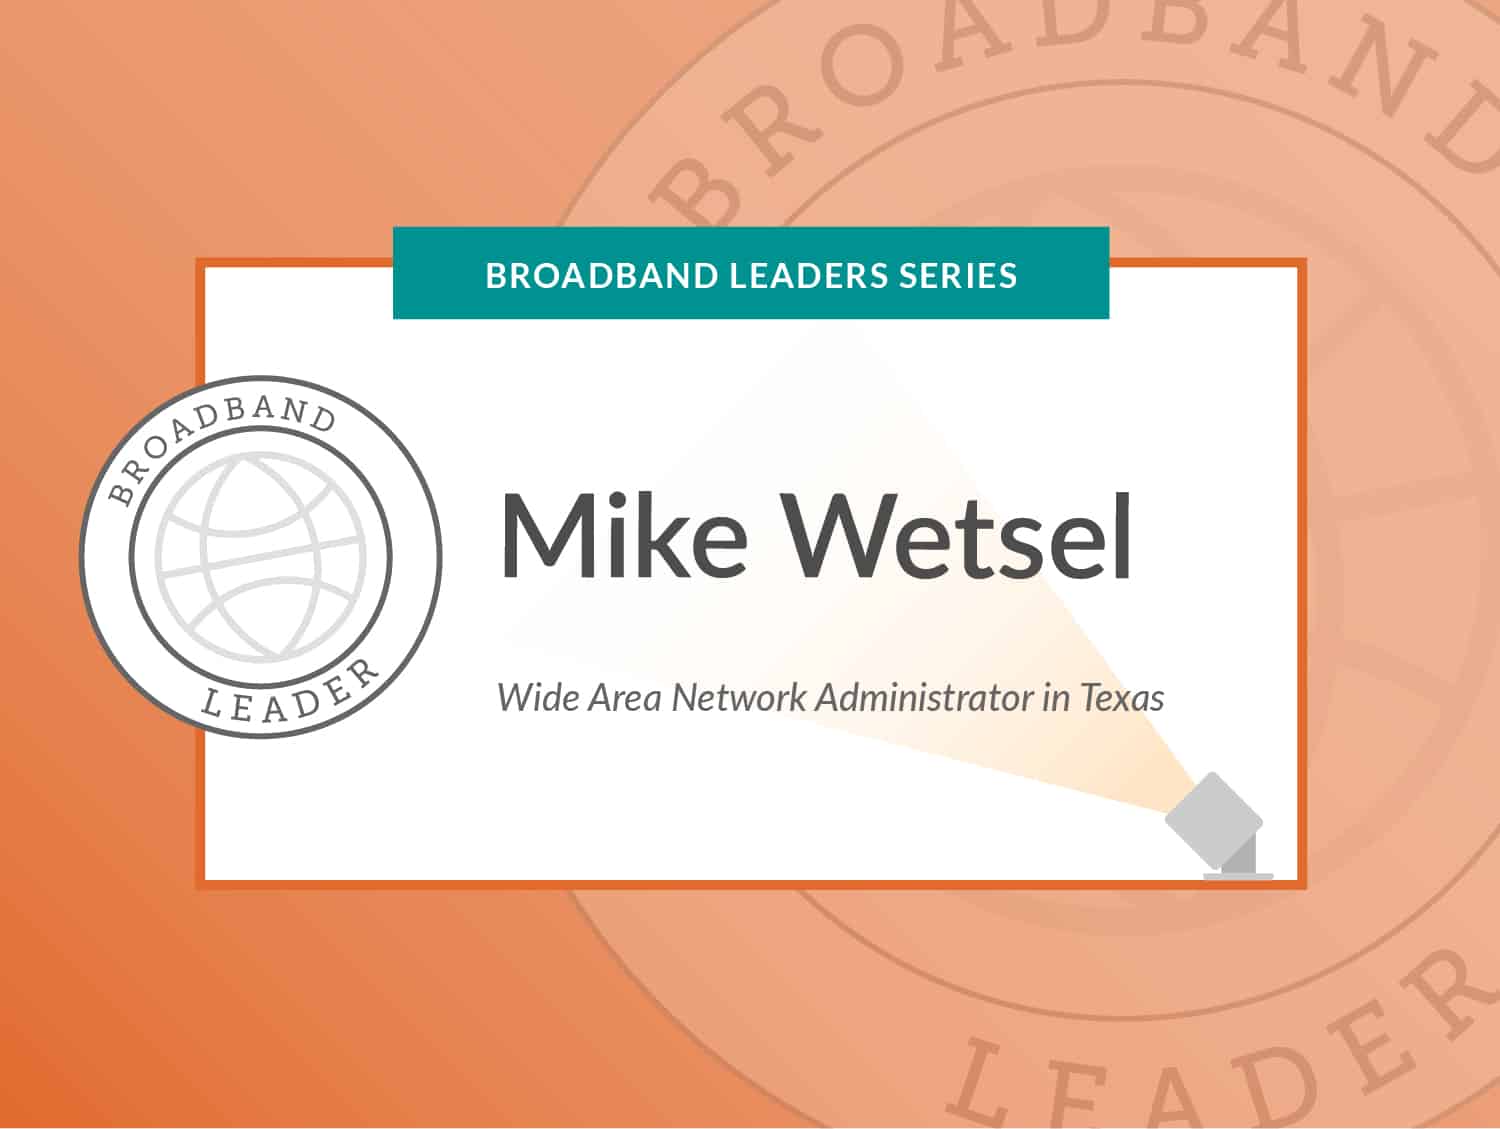 Broadband Leader: Mike Wetsel, Wide Area Network Administrator in Texas